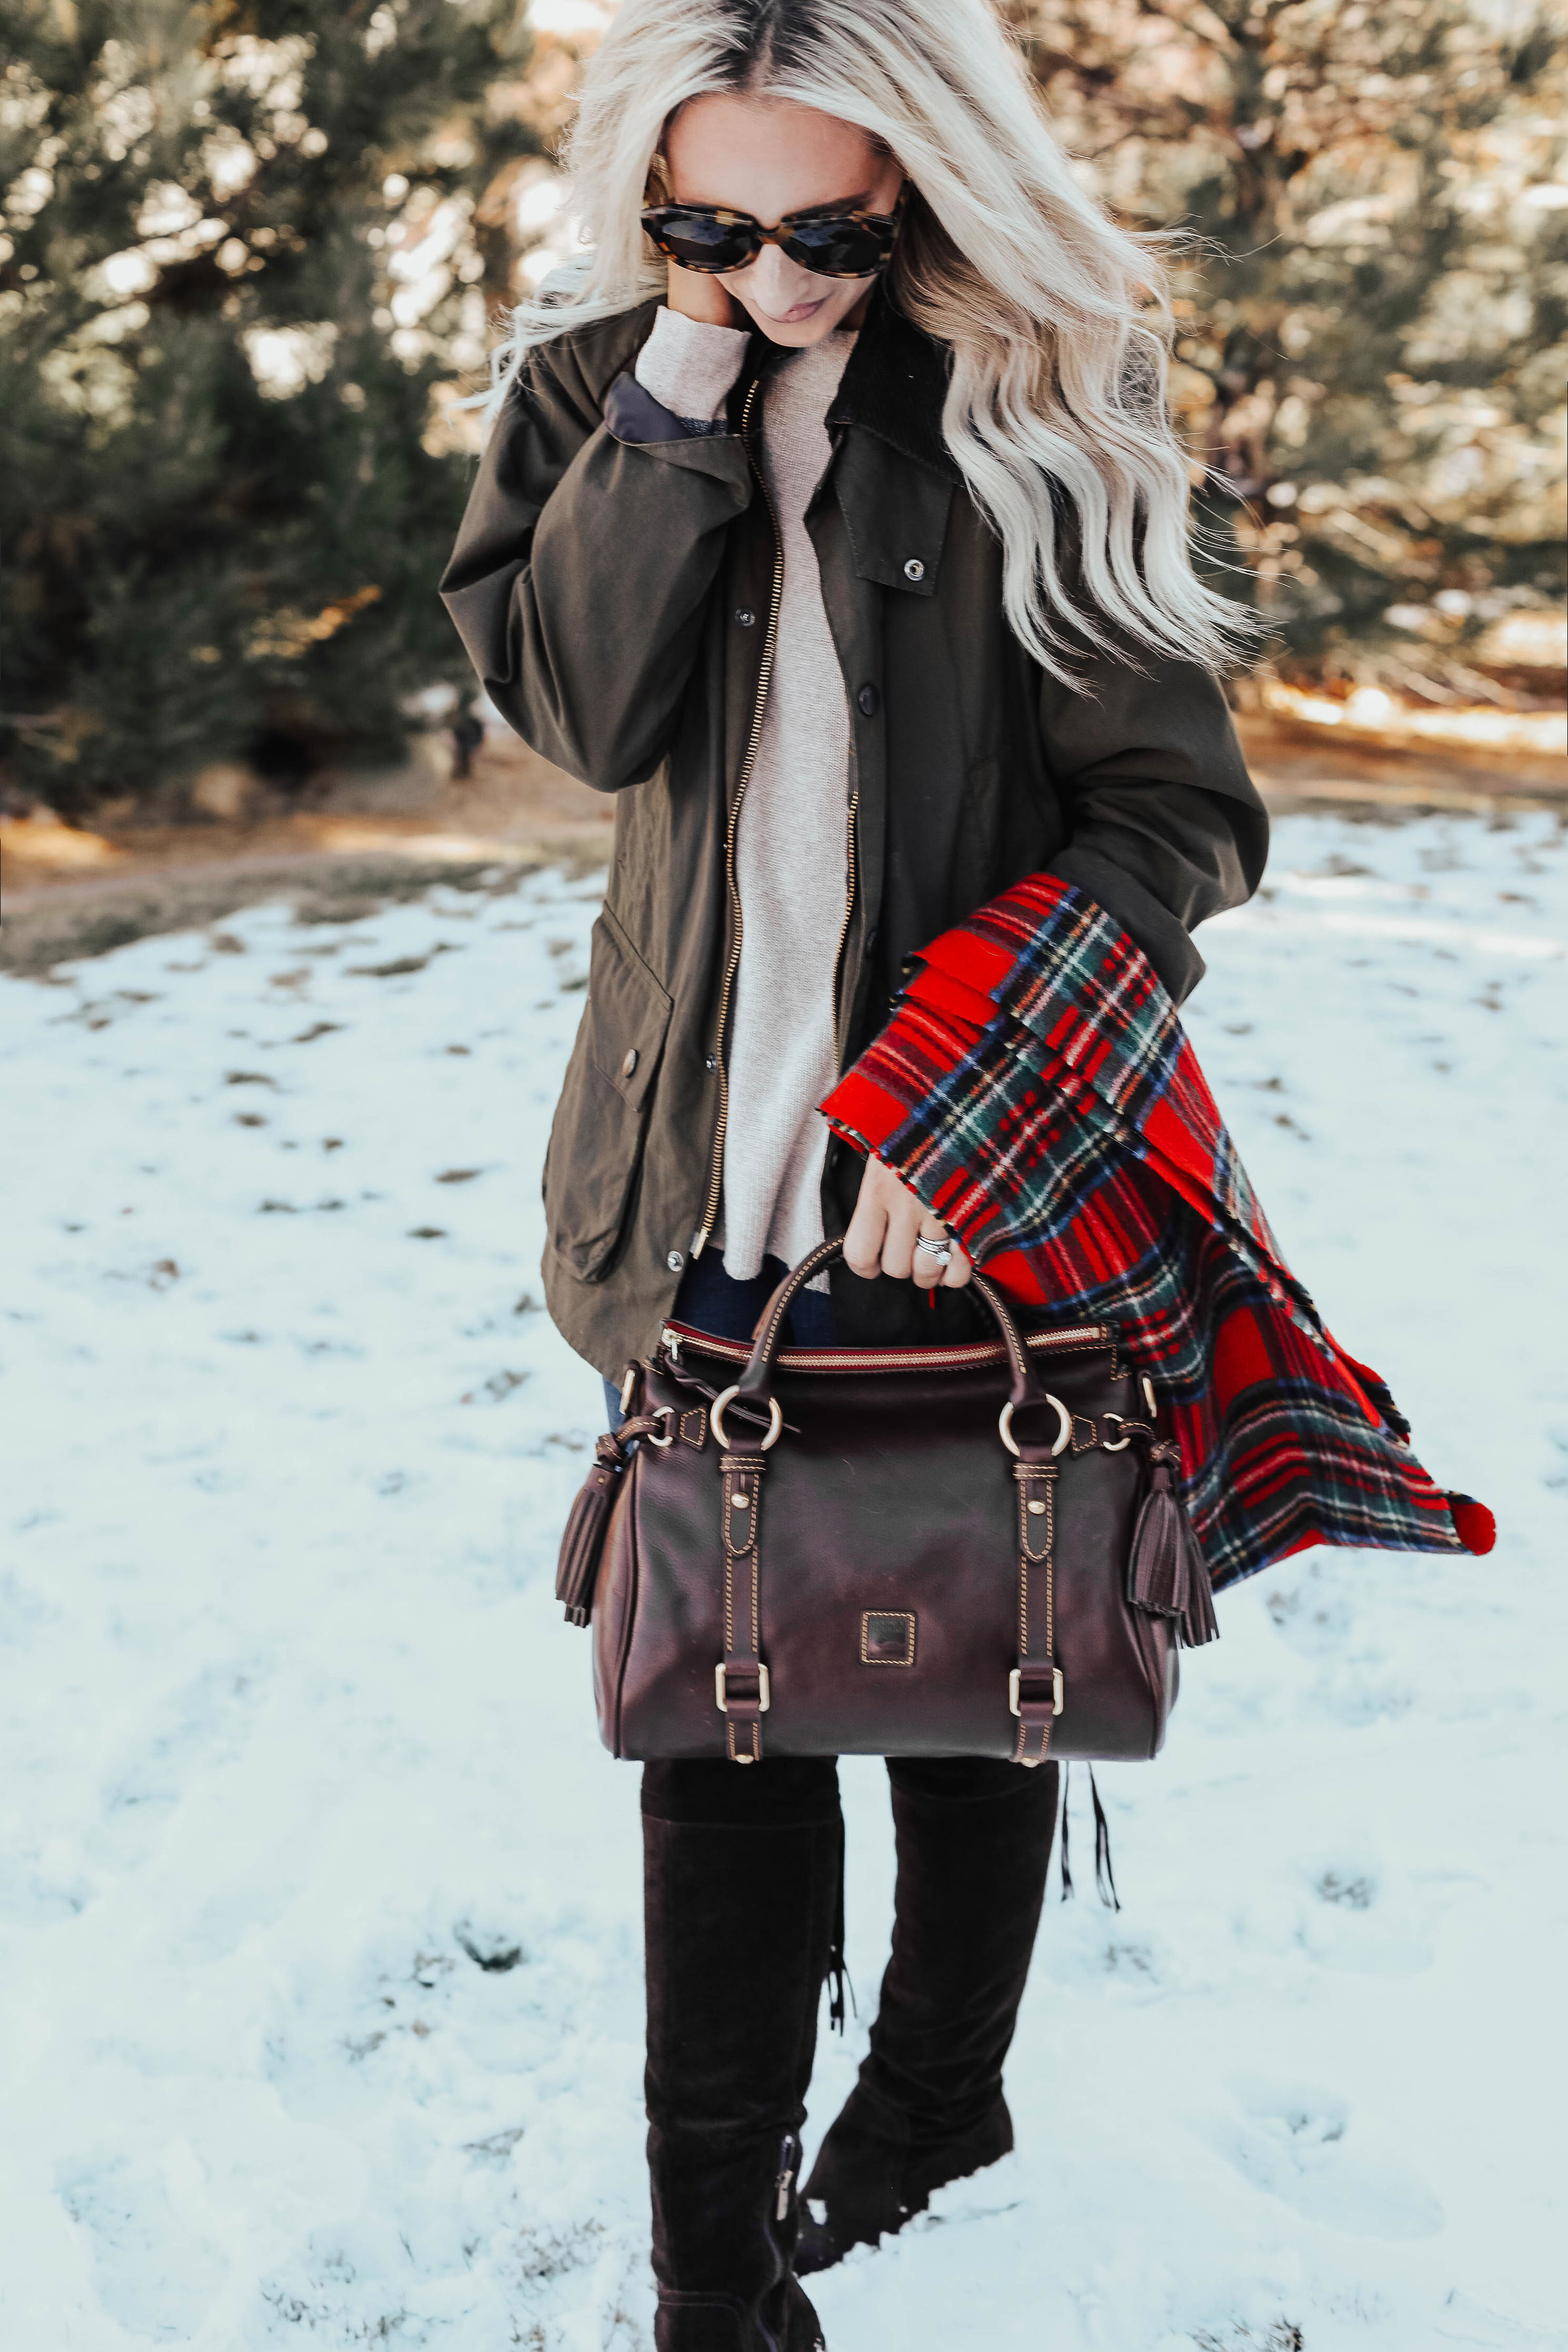 Reno Nevada Blogger, Emily Farren Wieczorek talks about her longstanding love for Dooney & Bourke handbags from Zappos - and her picks for holiday gifting. 